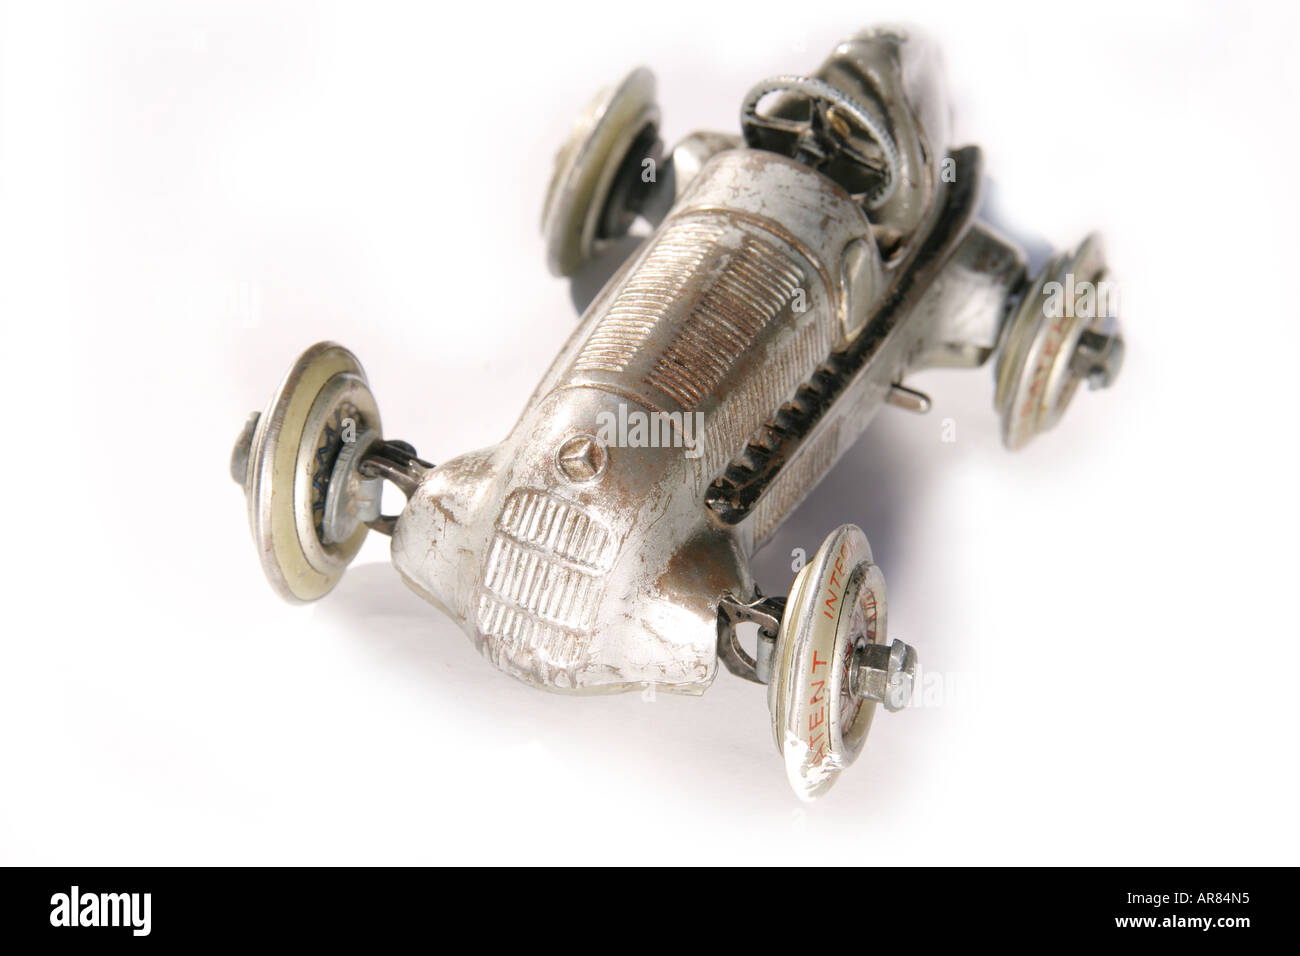 A Mercedes toy racing car model from the 1940 s on white background Stock Photo